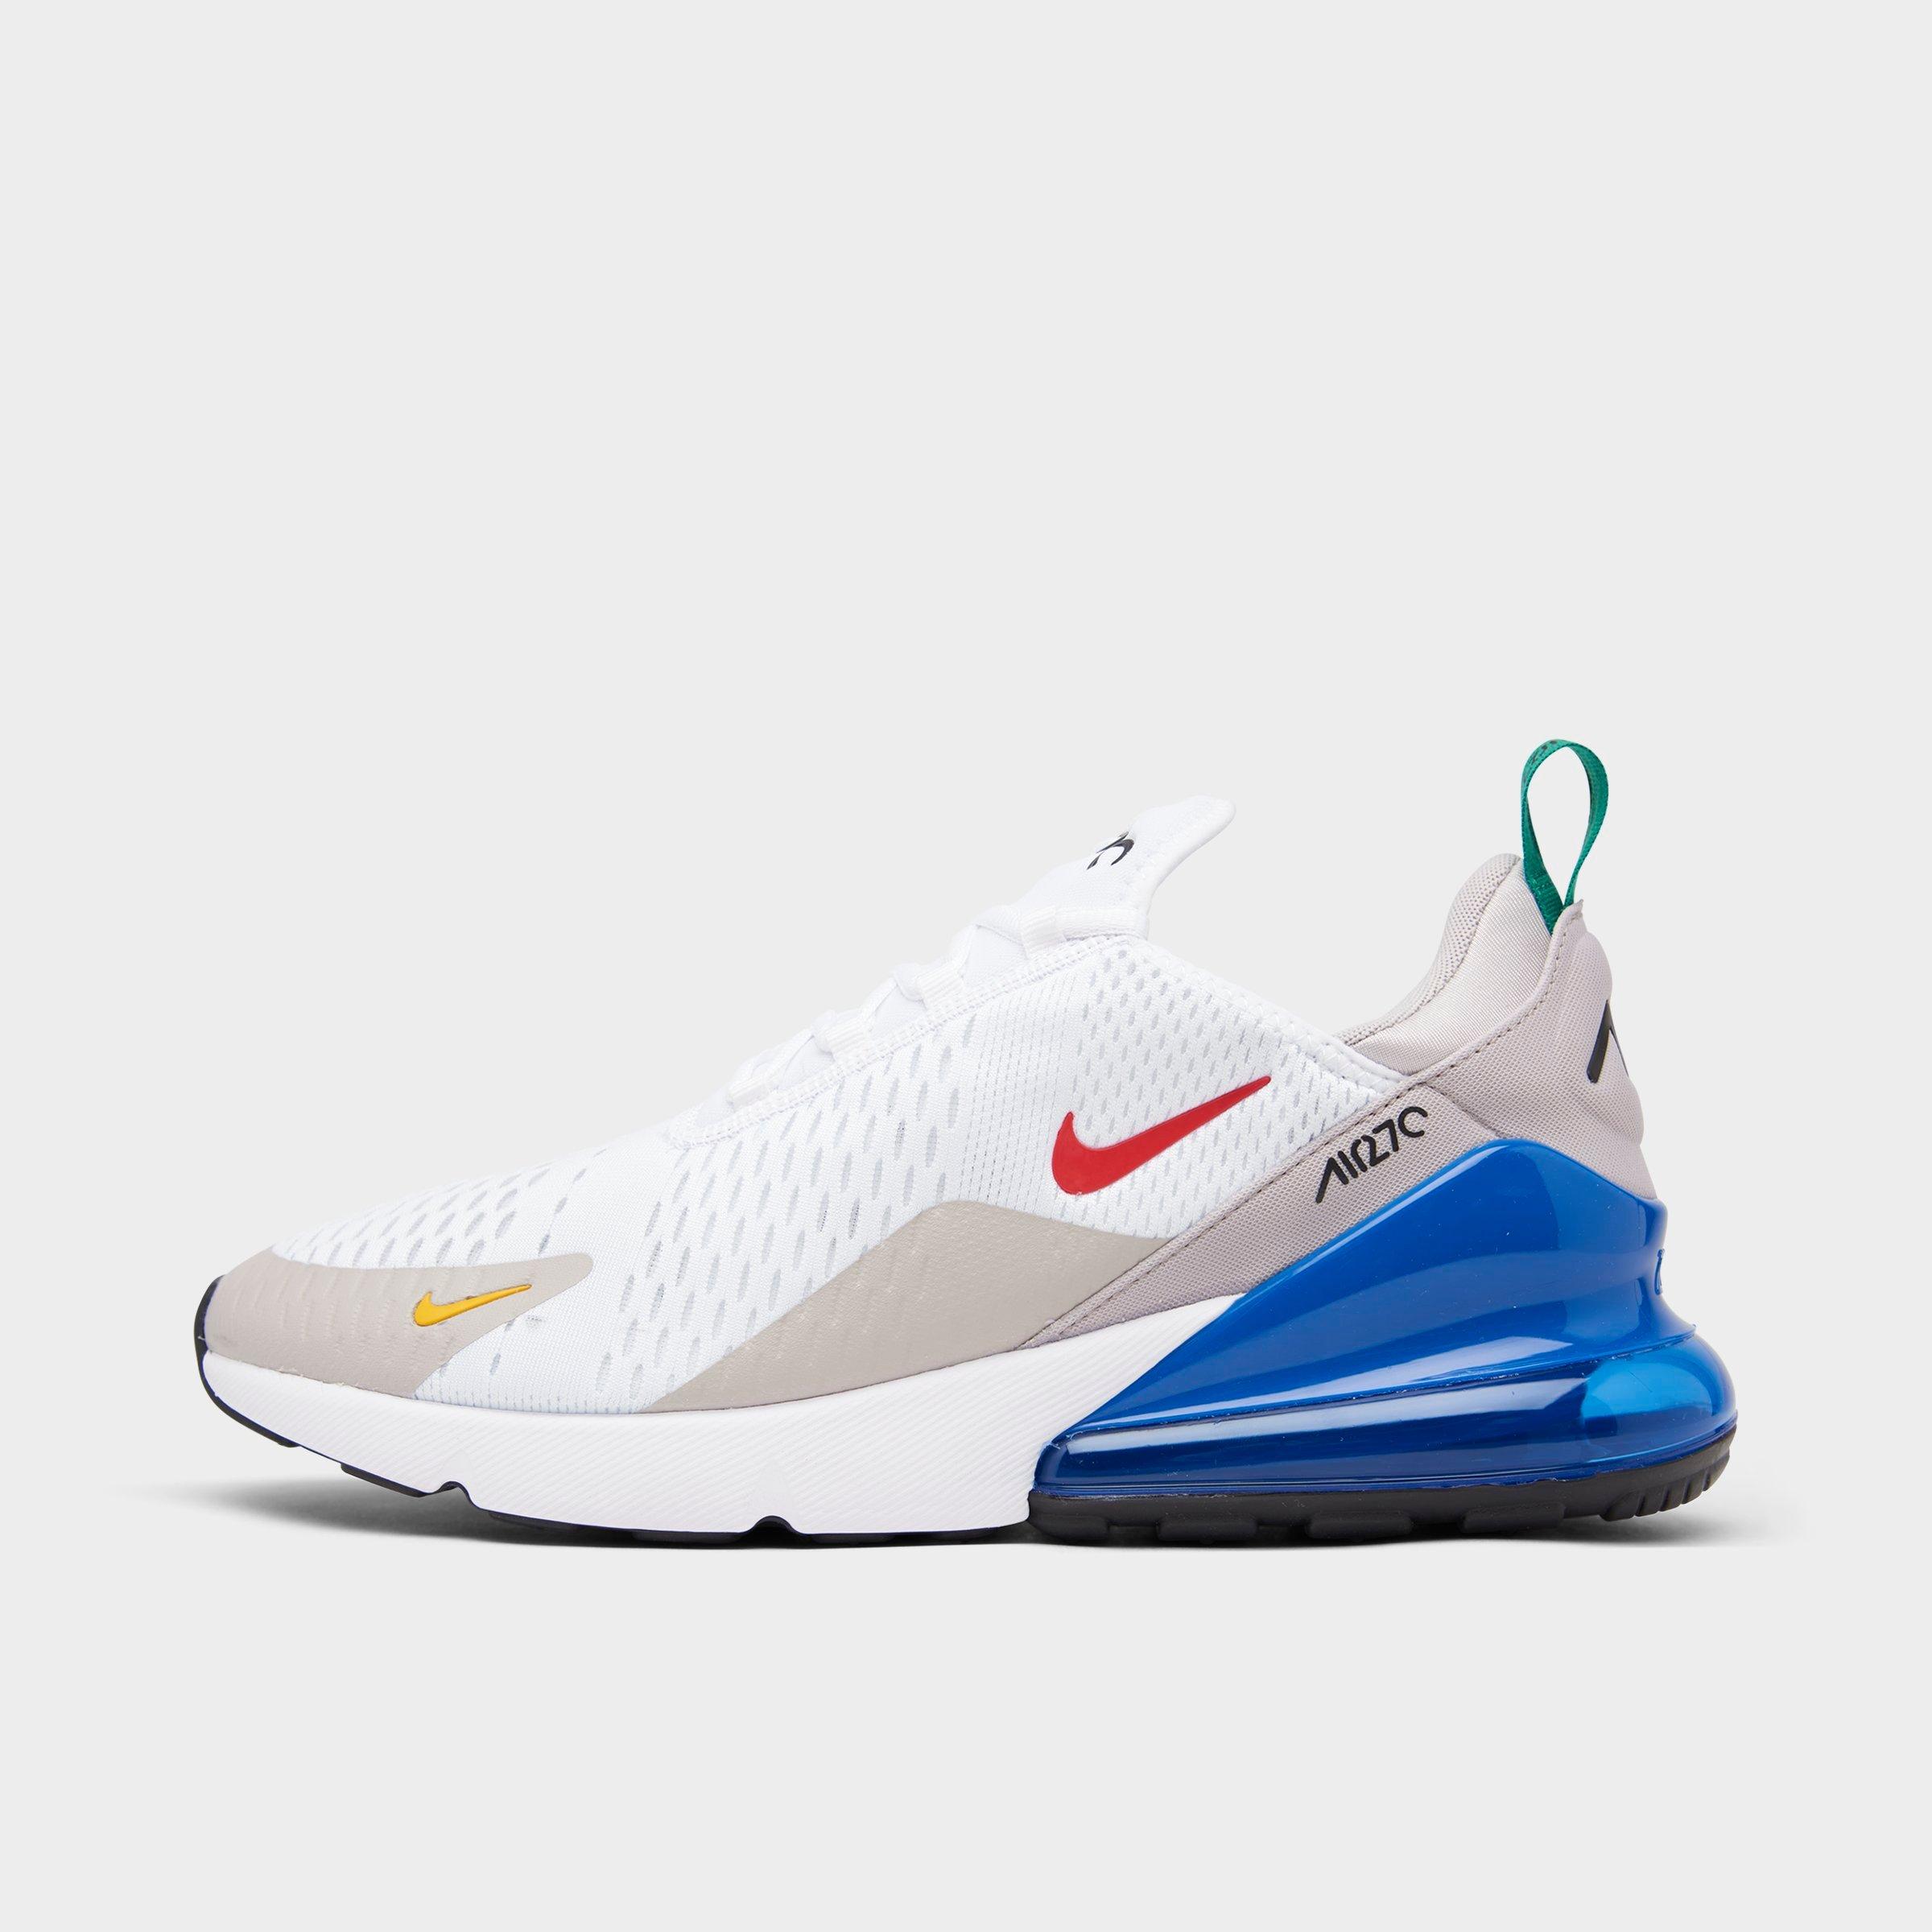 white and university red nike air max 270